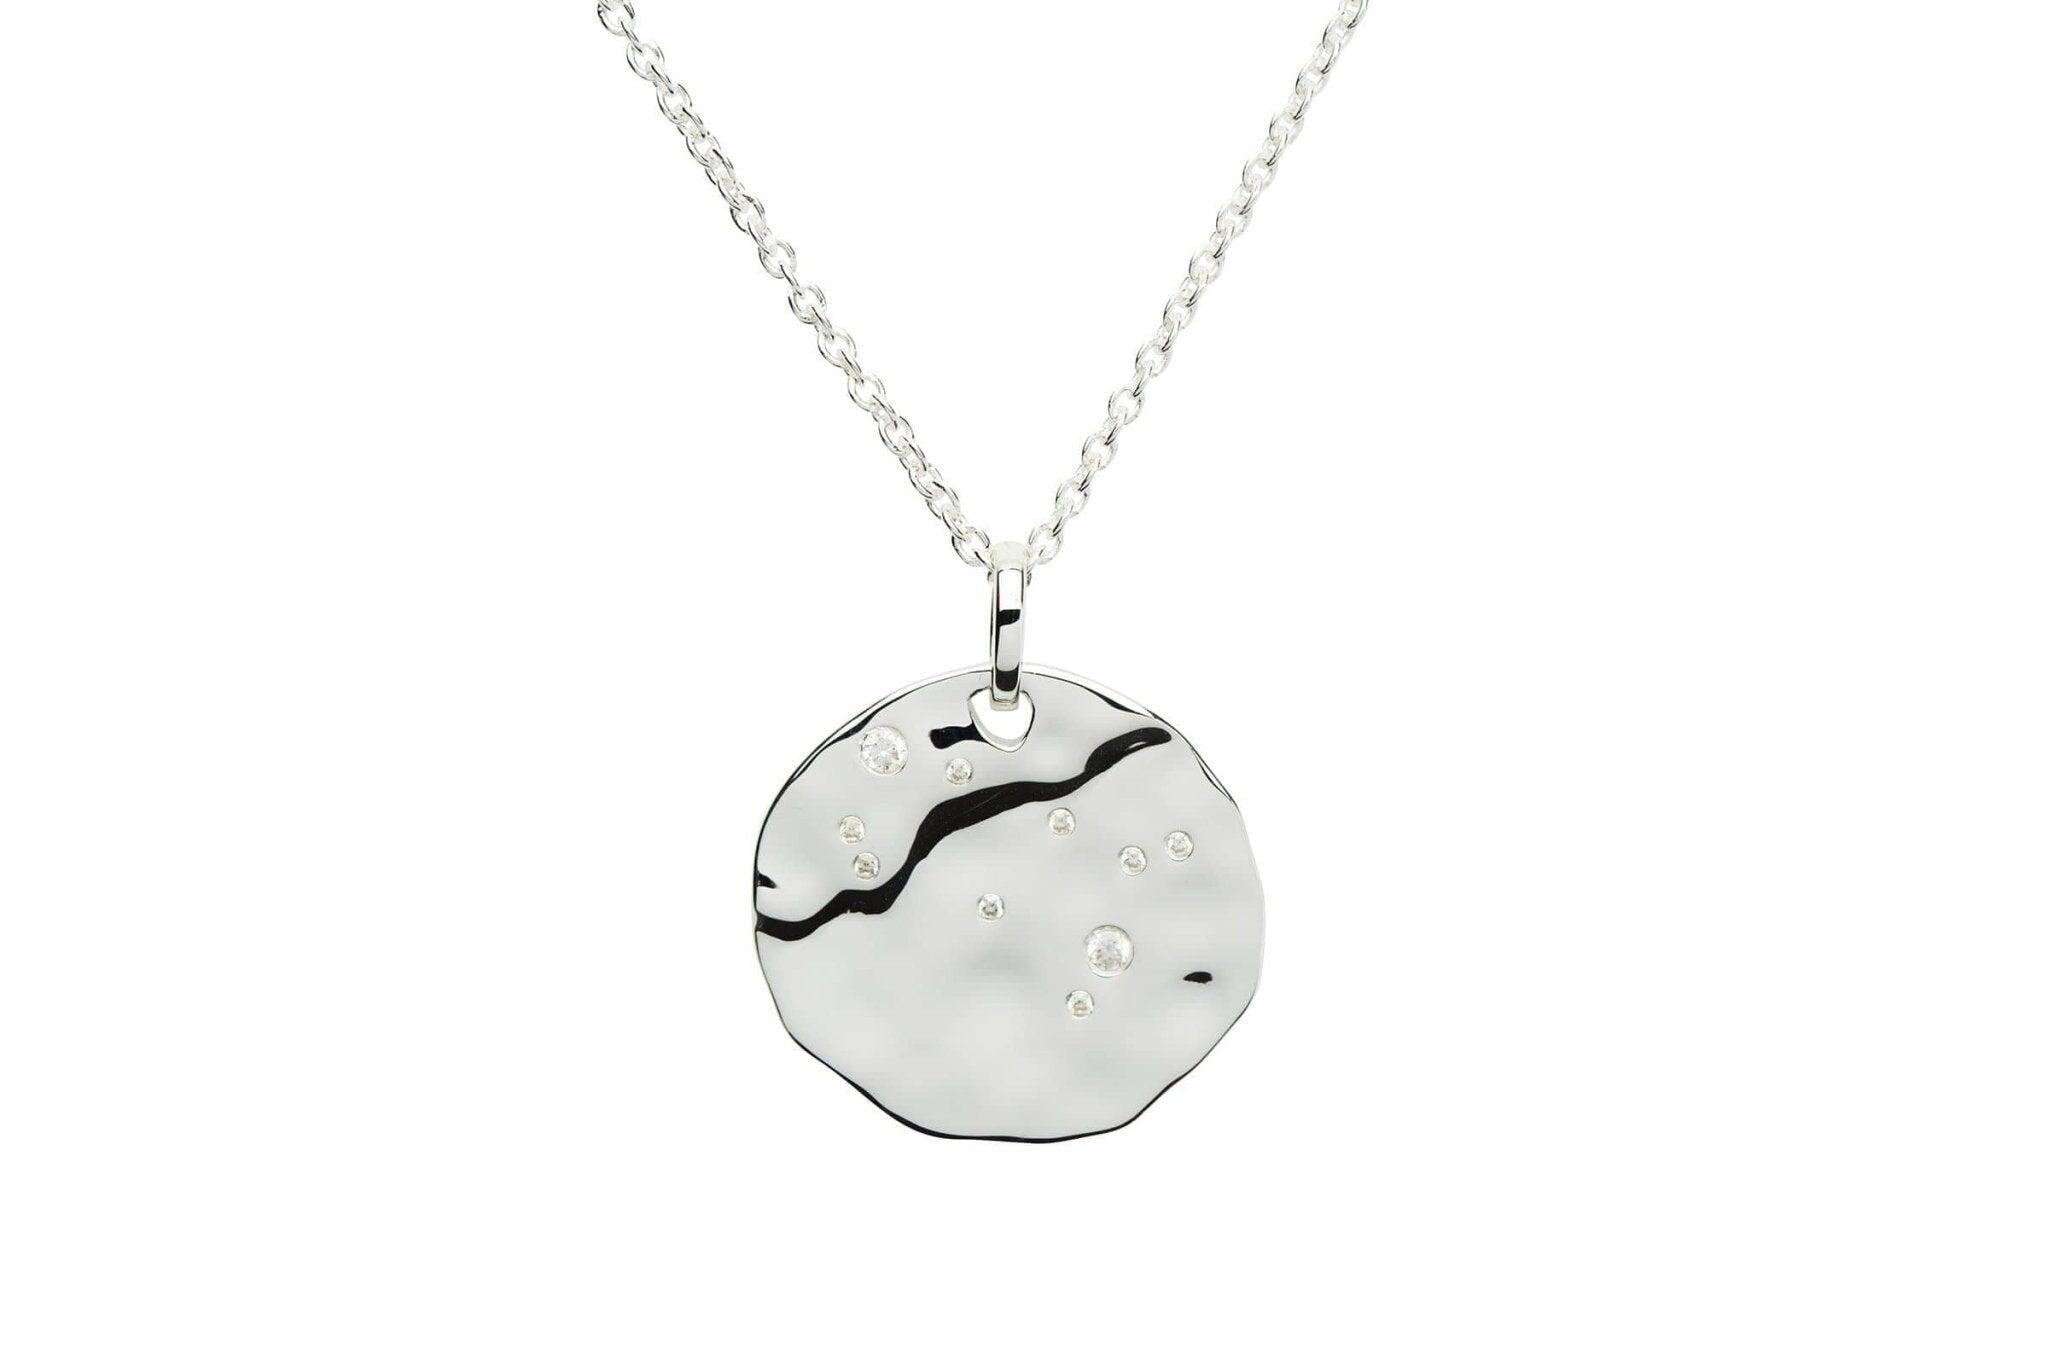 Unique & Co Hammered Sterling Silver & Cubic Zirconia Zodiac Constellation Gemini Birthday Necklace Pendant - The Classic Watch Buyers Club Ltd